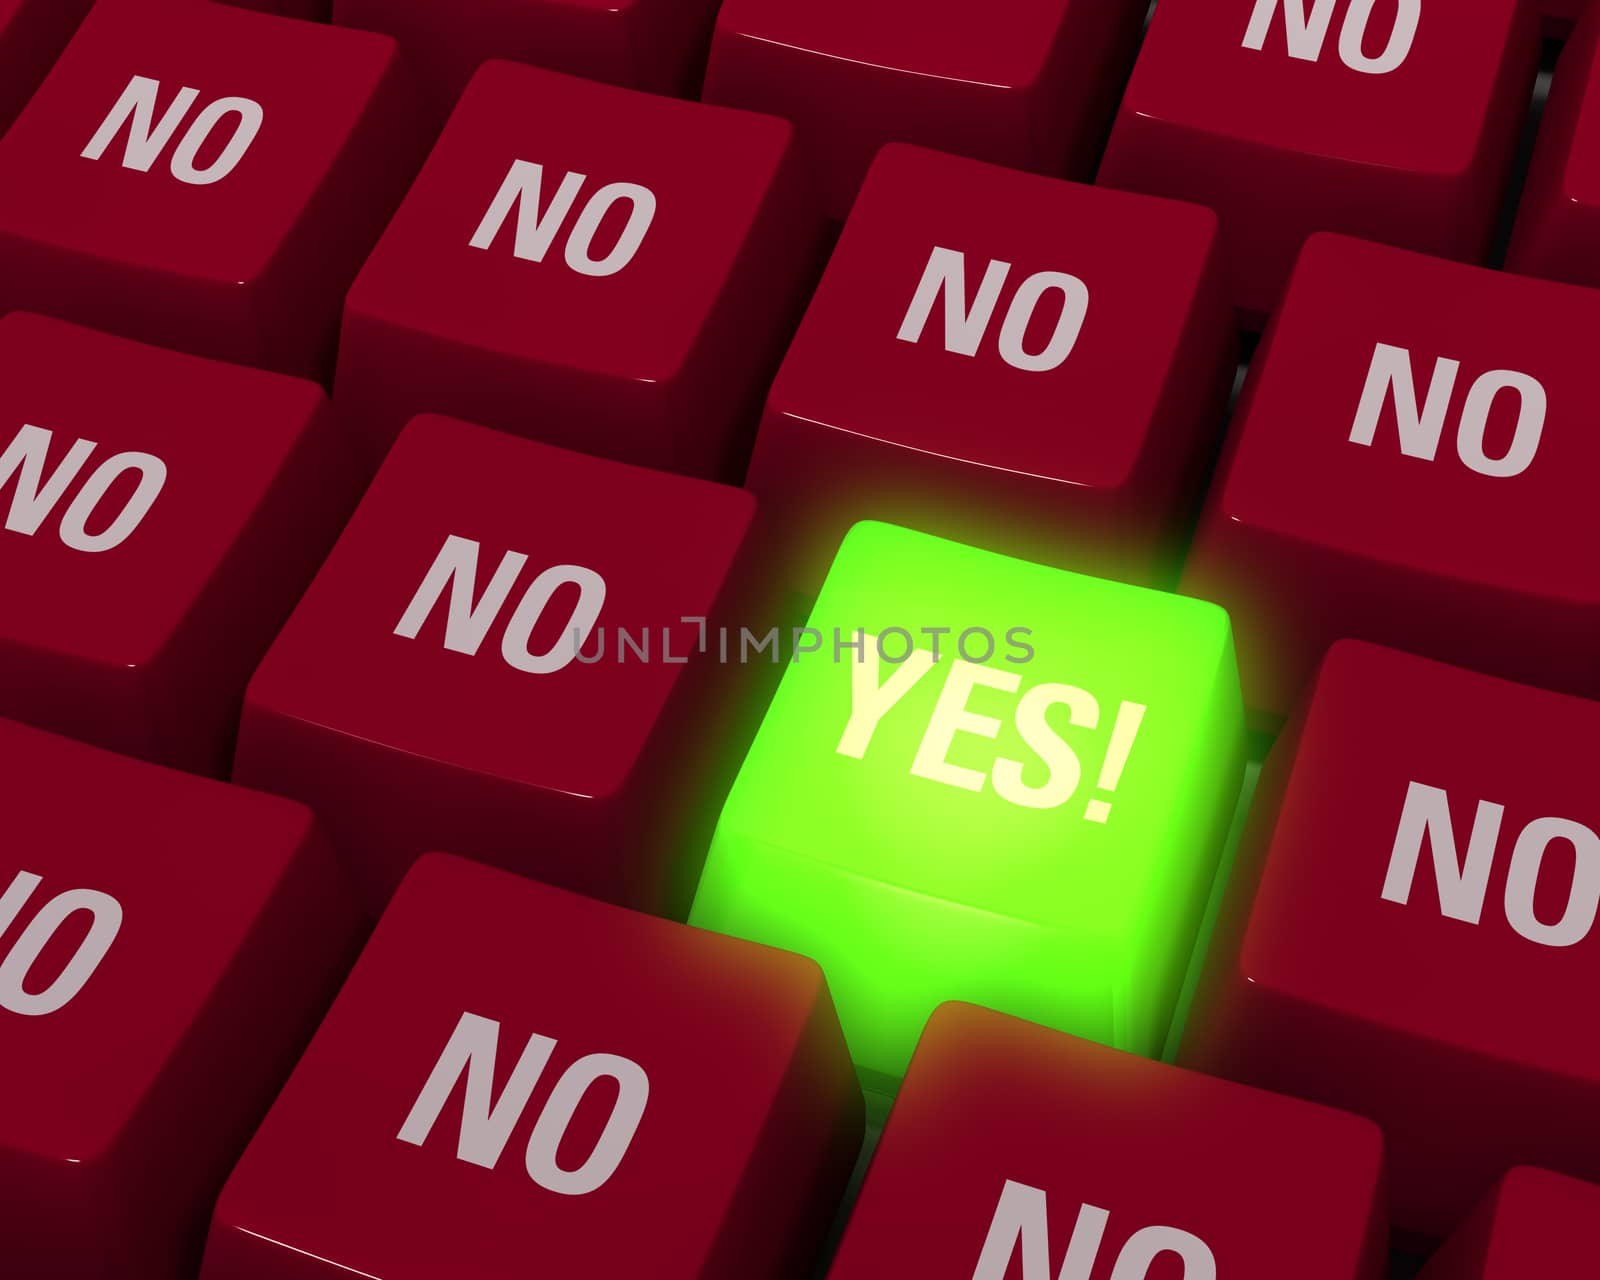 Close up photo-real illustration of red computer keyboard keys surrounding a single green glowing "YES" key.